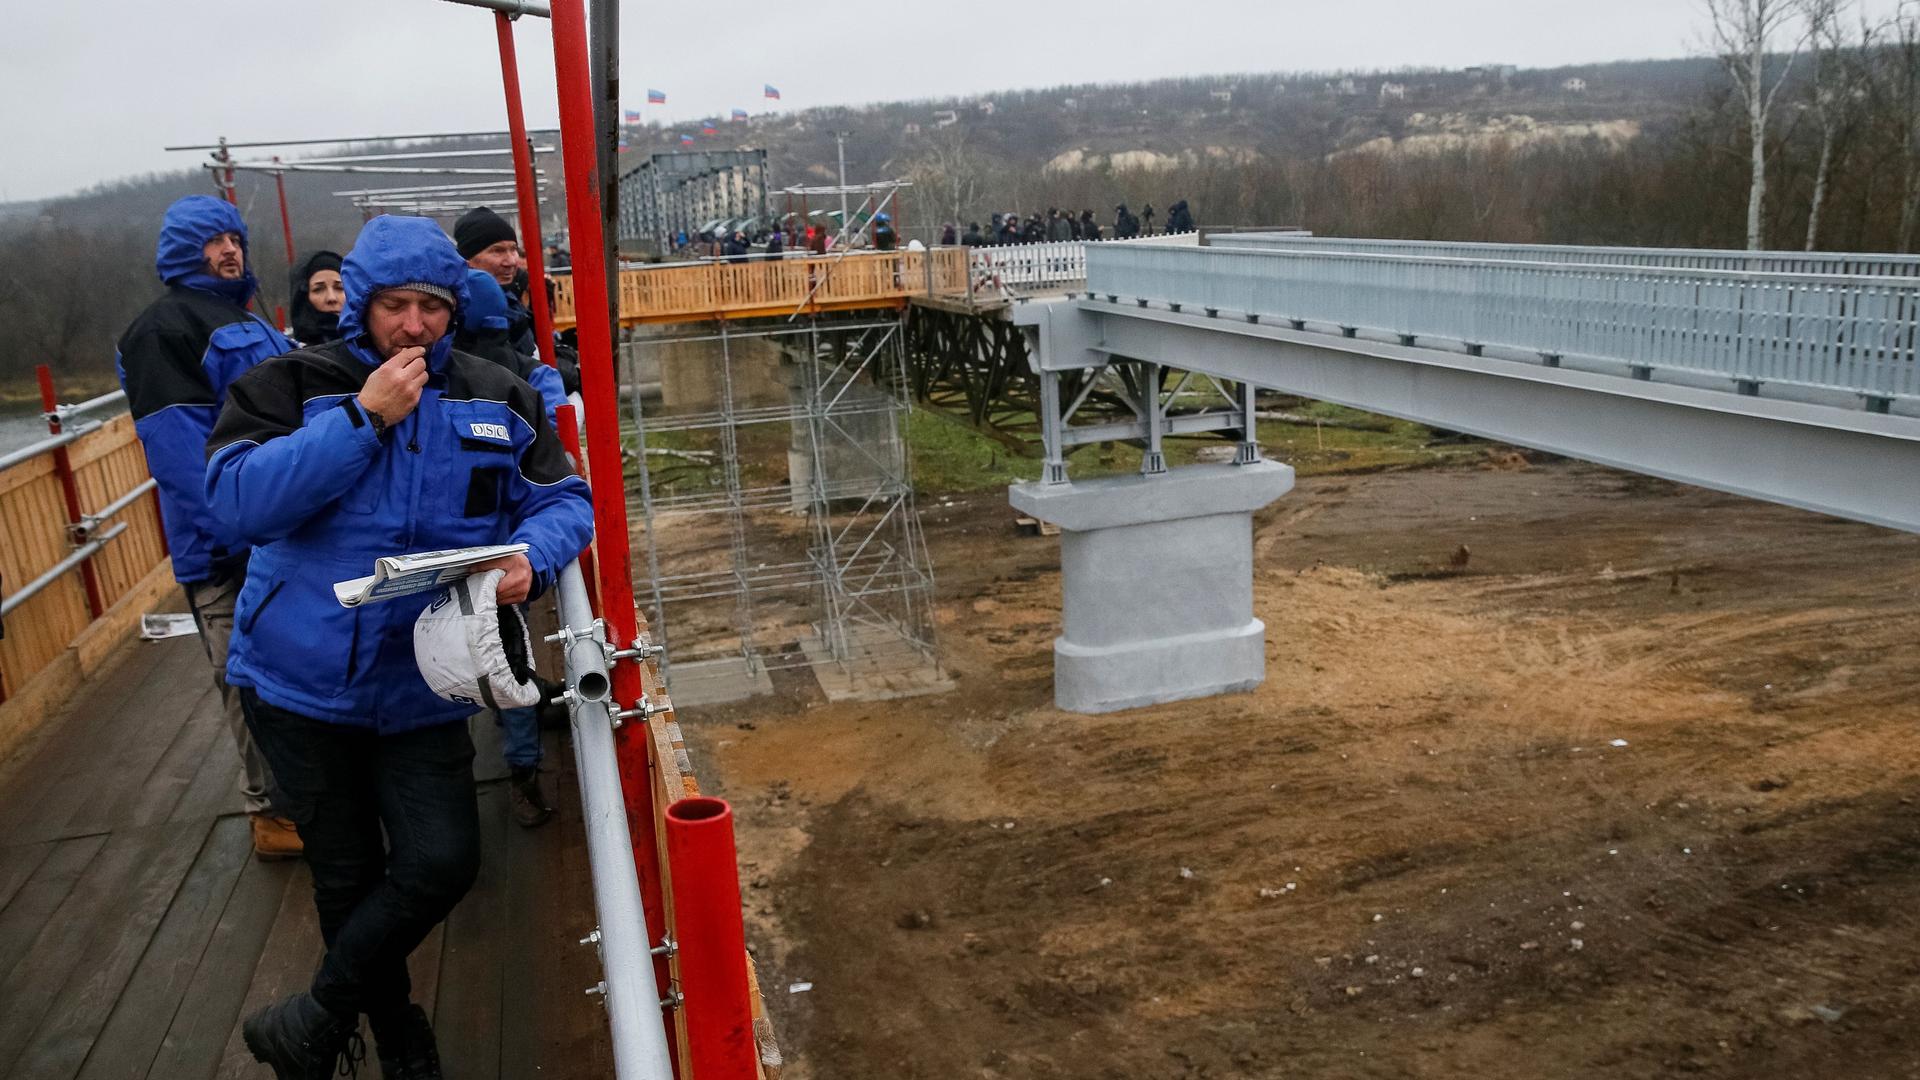 Members of Organization for Security and Cooperation in Europe (OSCE) look on as they visit a section of the restored bridge, which was blown up during a military conflict between Ukrainian government forces and Russian-backed rebels, in the settlement of